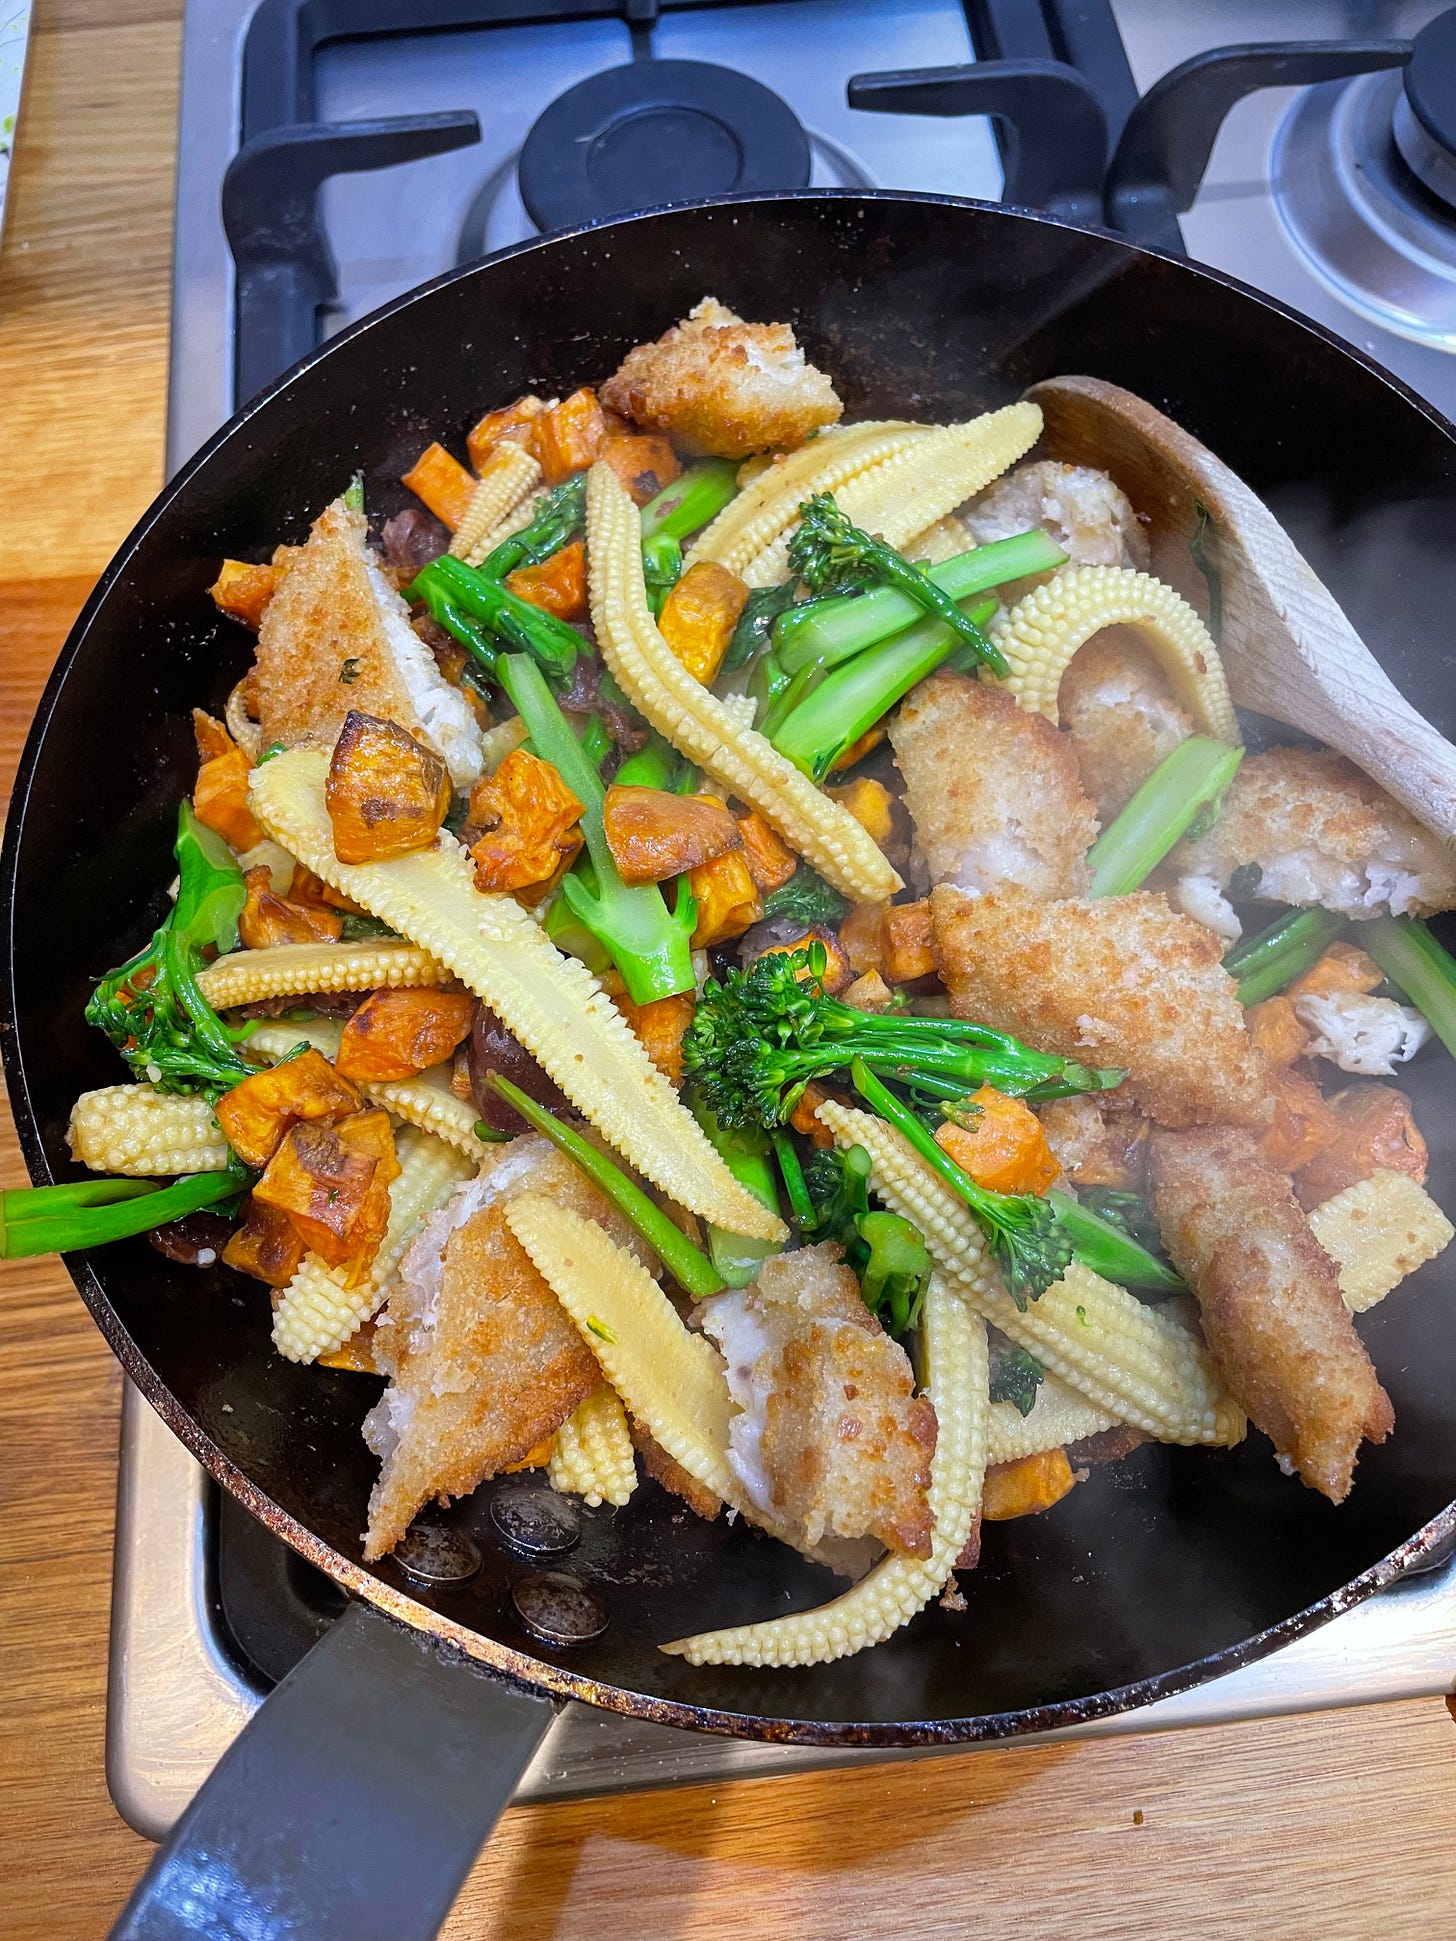 Fry pan with a just-cooked stir fry including chopped fish fingers, baby corn, baked sweet potato, broccolini from Lara Lee's new cookbook.